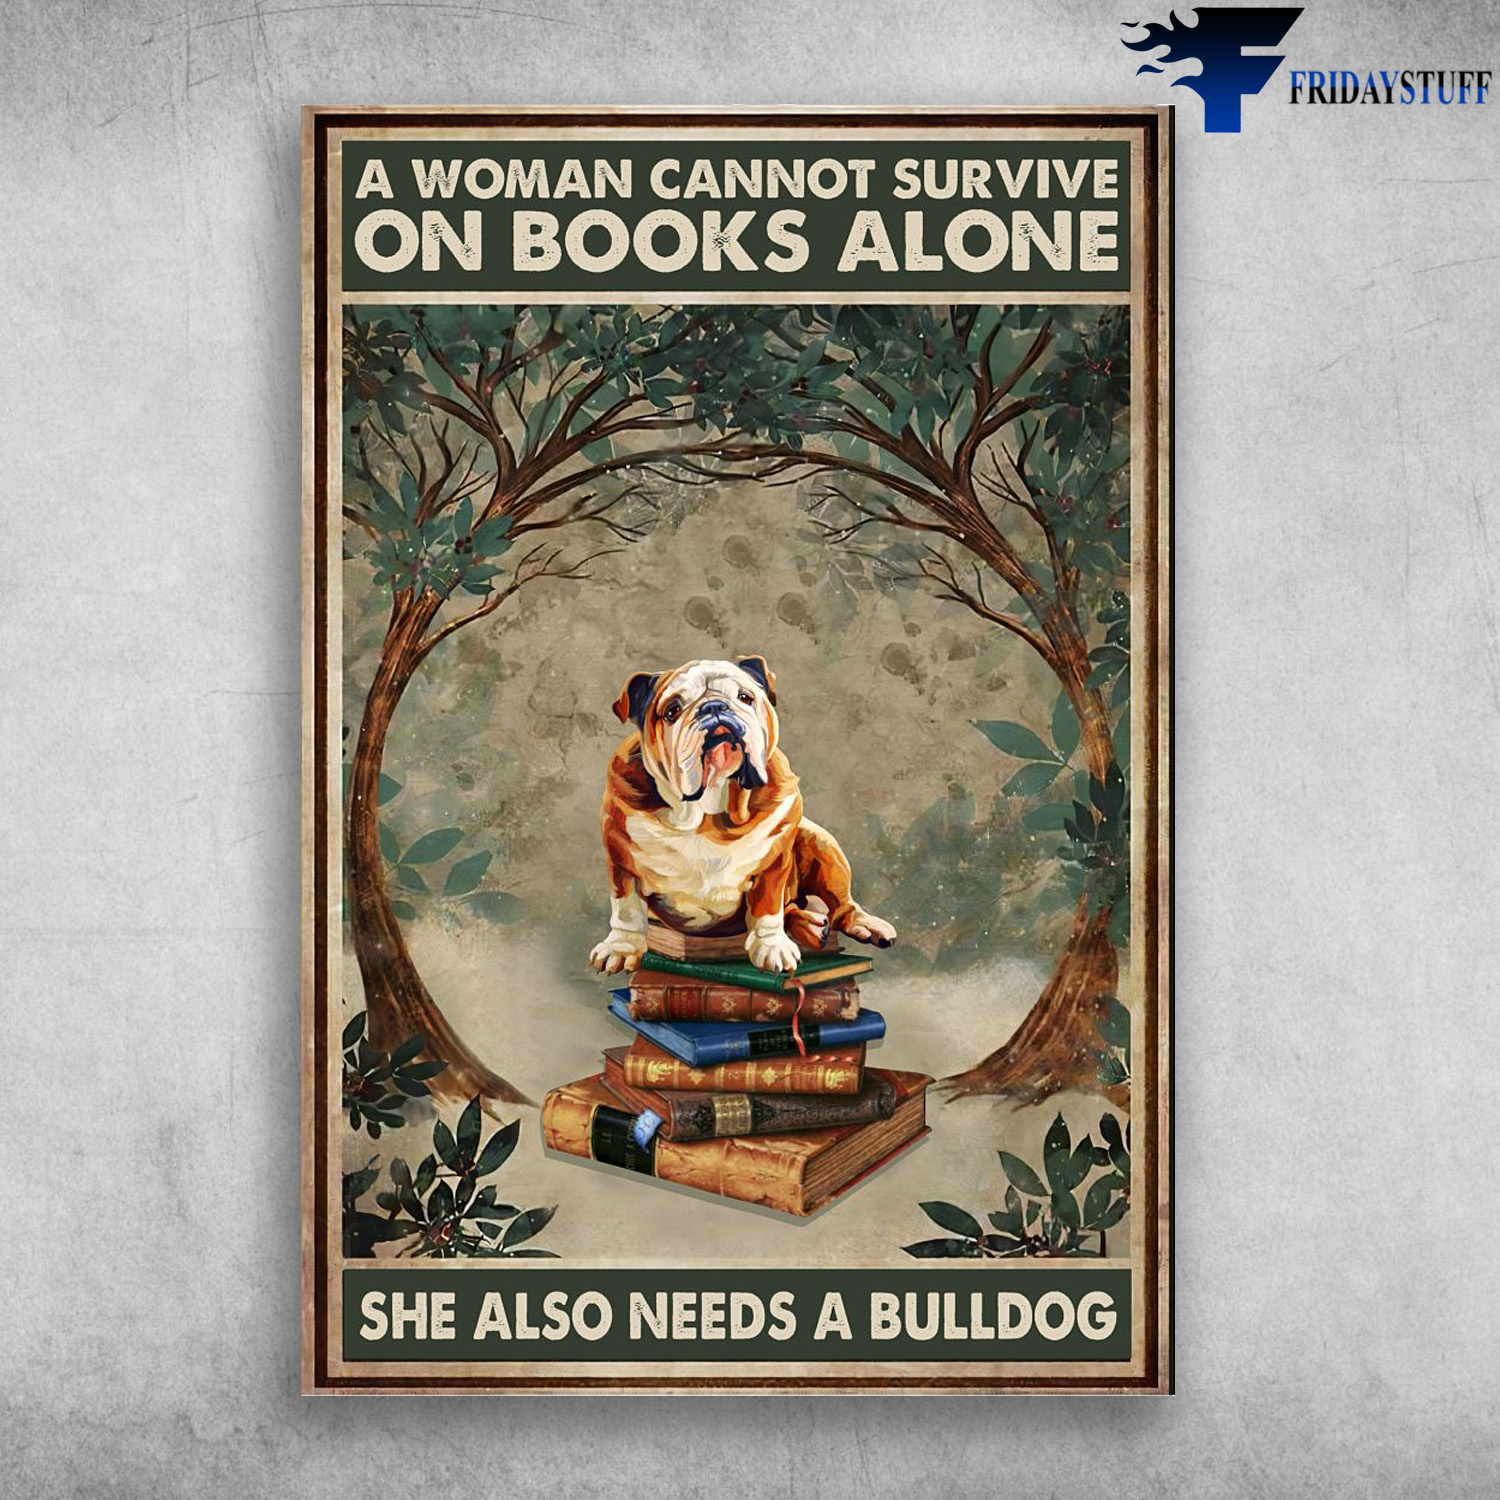 Bulldog Sitting On The Books - A Woman Cannot Survive On Books Alone, She Also Needs A Bulldog